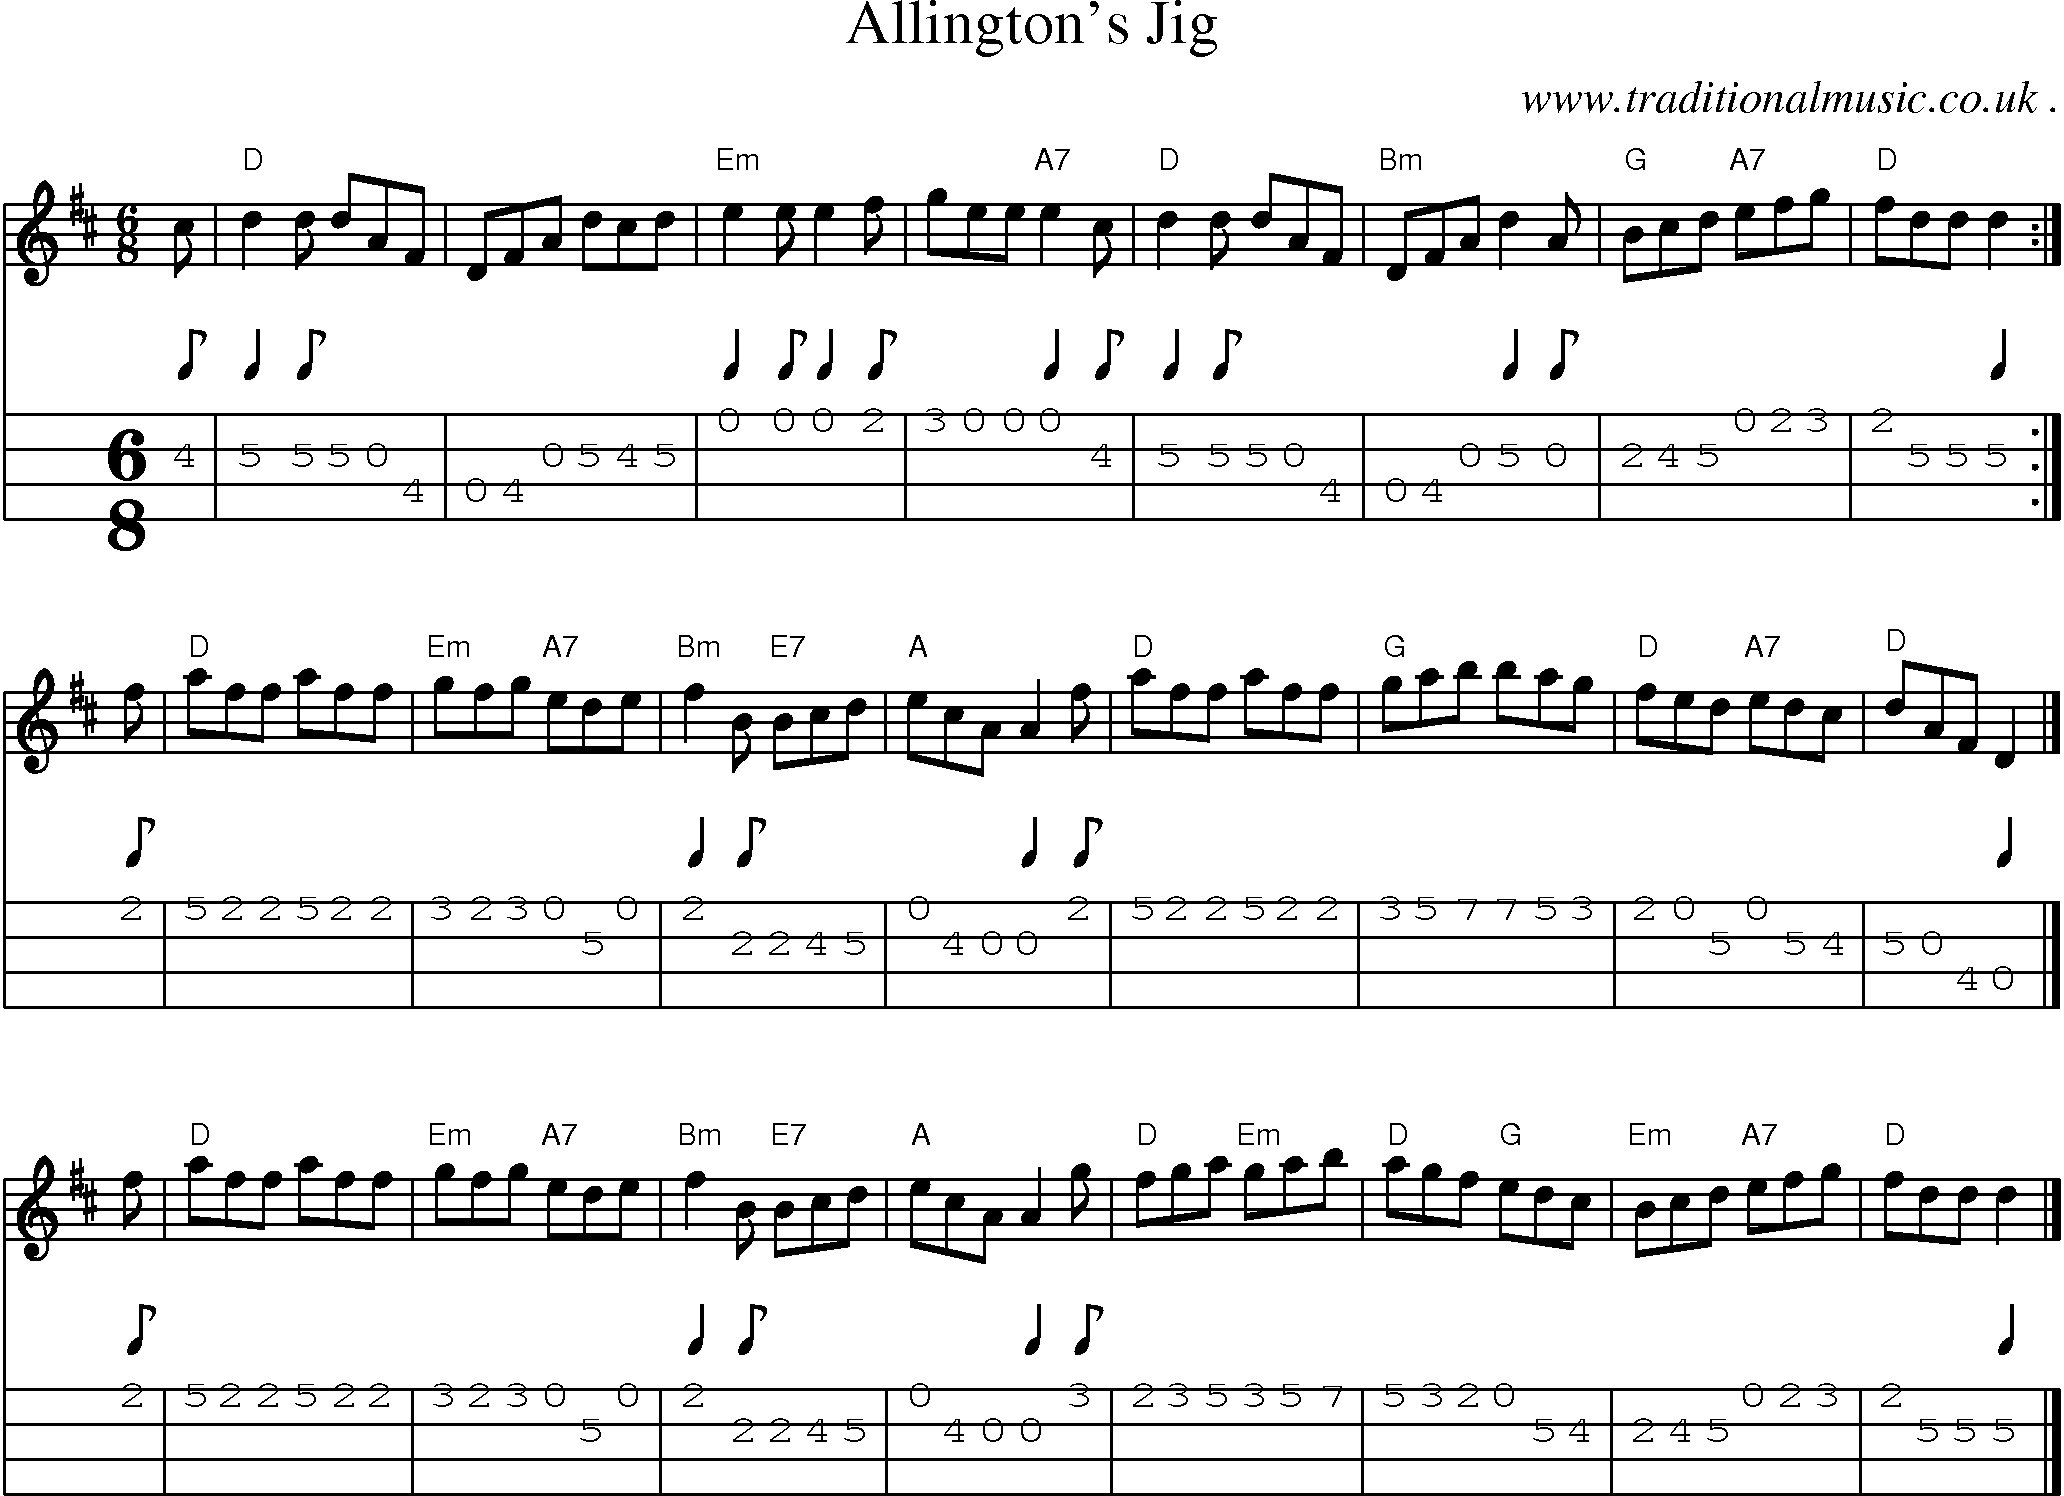 Sheet-music  score, Chords and Mandolin Tabs for Allingtons Jig